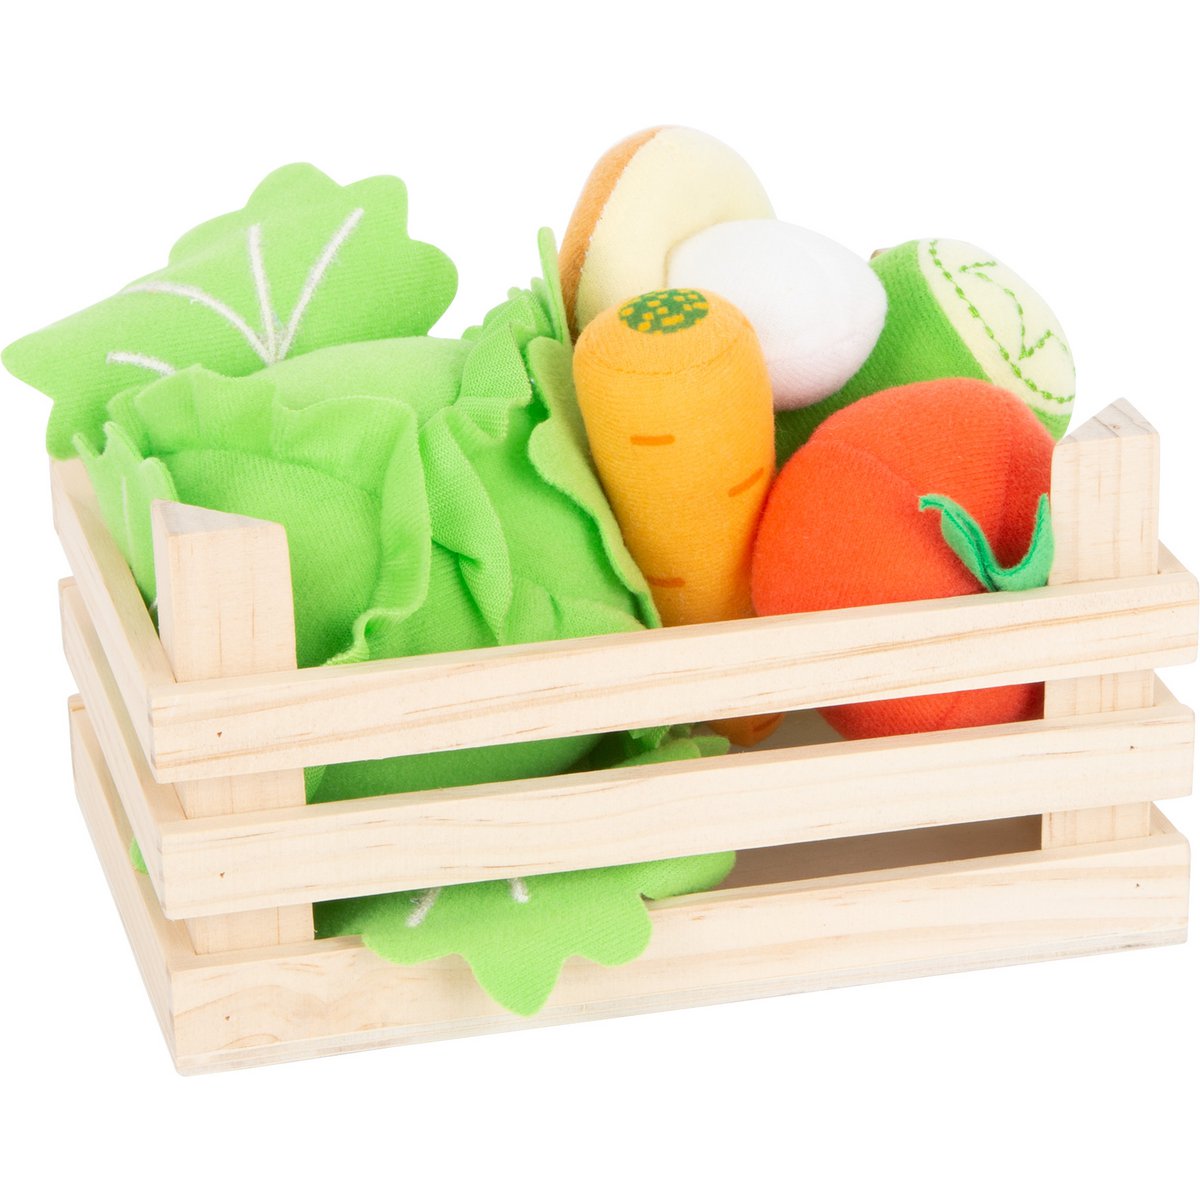 Fabric Vegetables Set in a Wooden Crate